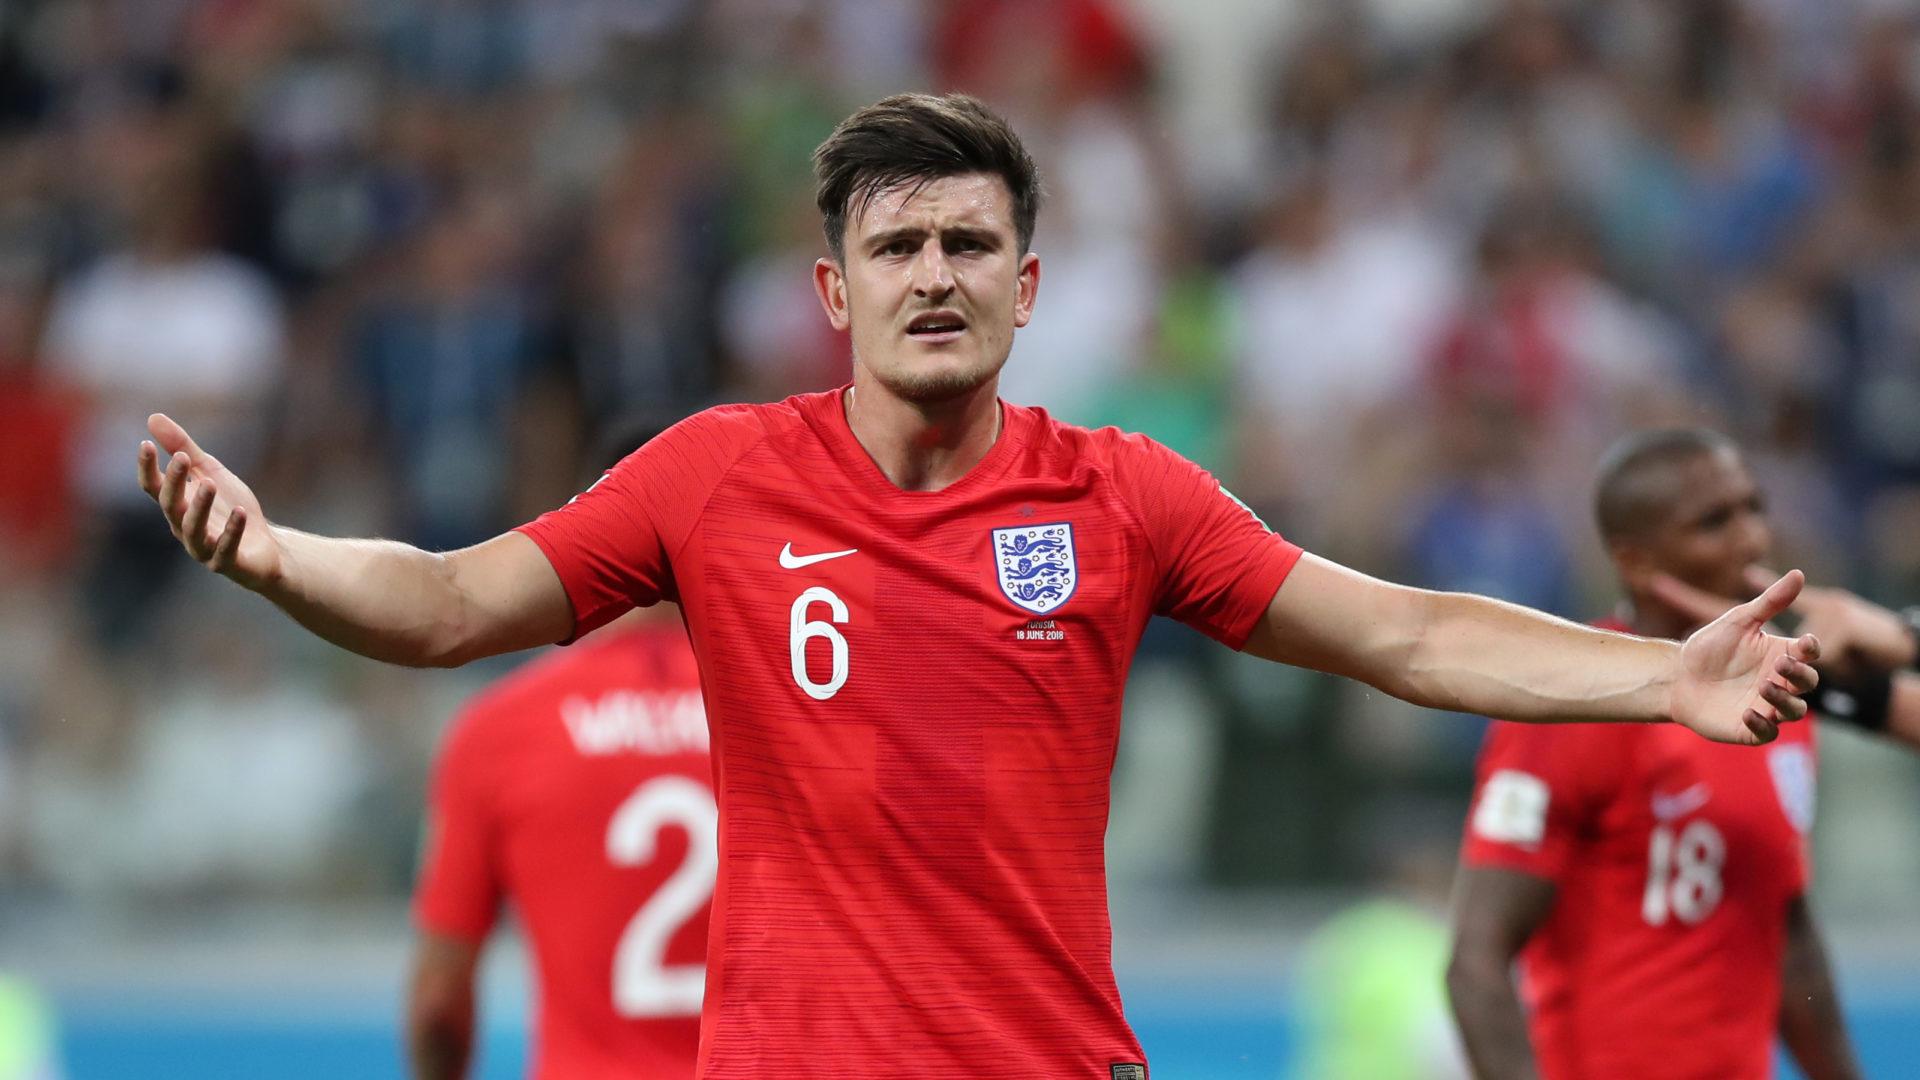 Jaap Stam backs Harry Maguire to recover from patchy form